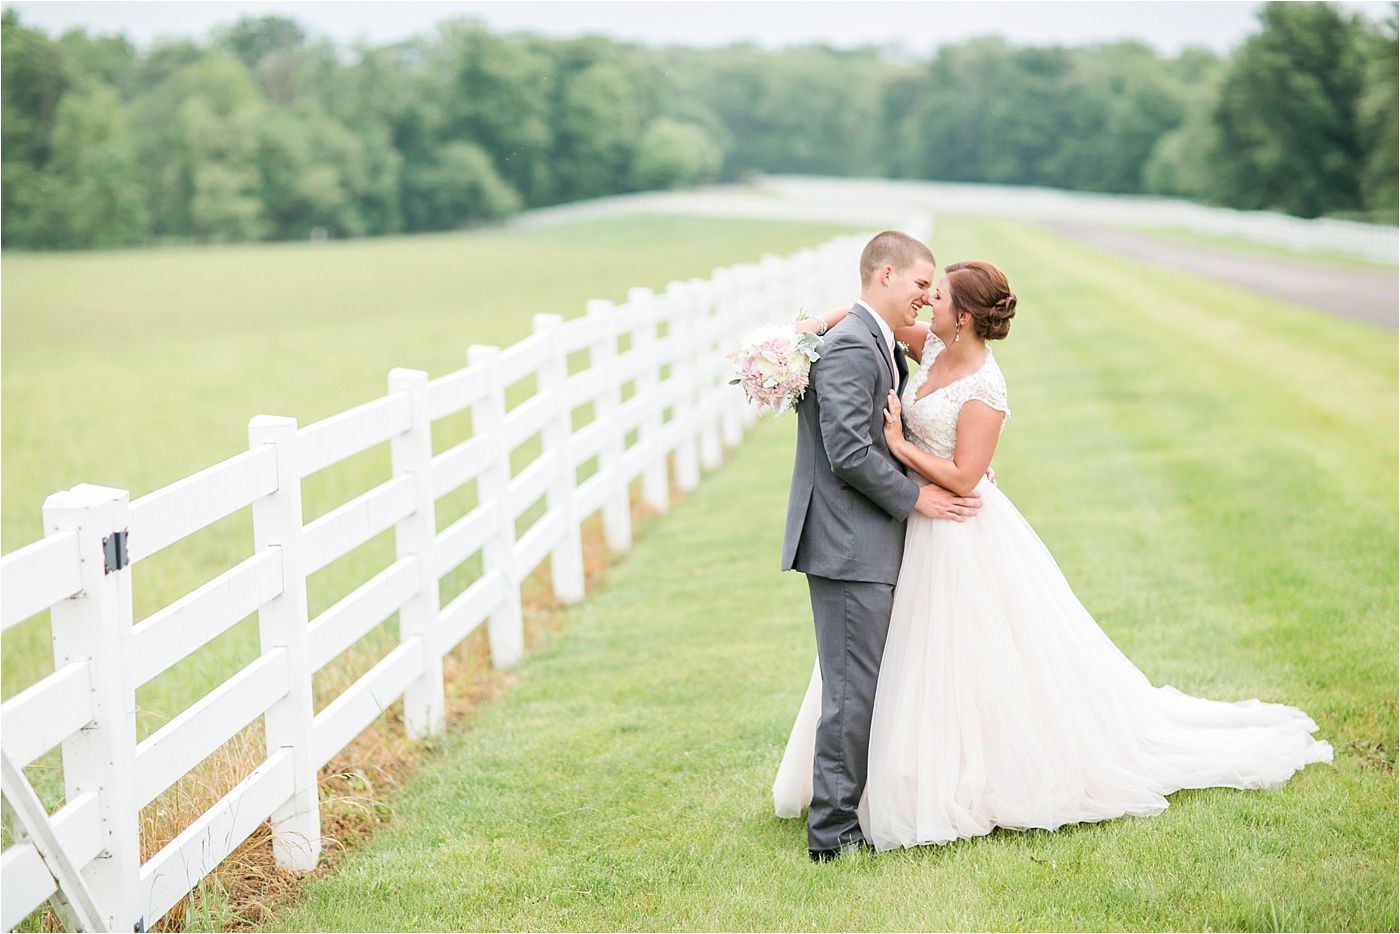 A Blush Outdoor wedding at Irongate Equestrian | KariMe Photography_0150